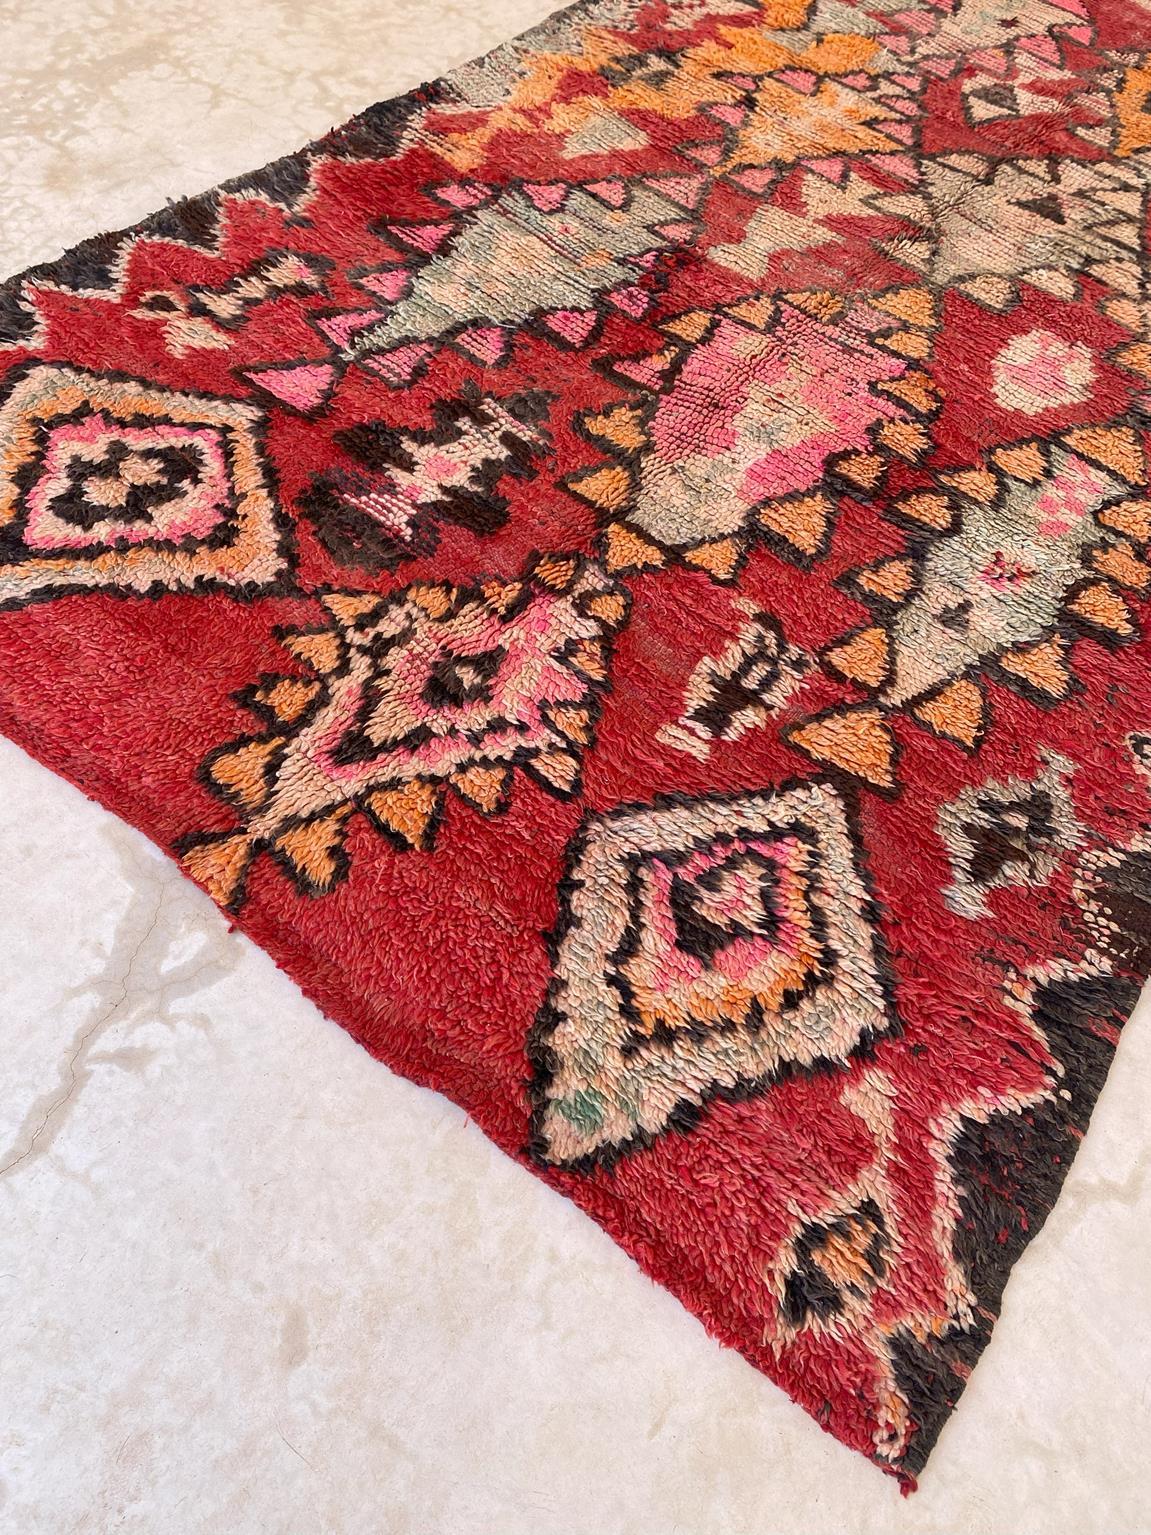 This beautiful vintage Boujad rug is a collector rug! It shows joyful colors and a bold pattern made of unregular abstract designs that probably refer to pregnancy. We know that birth is one of the main topics when it comes to tribal moroccan rugs,